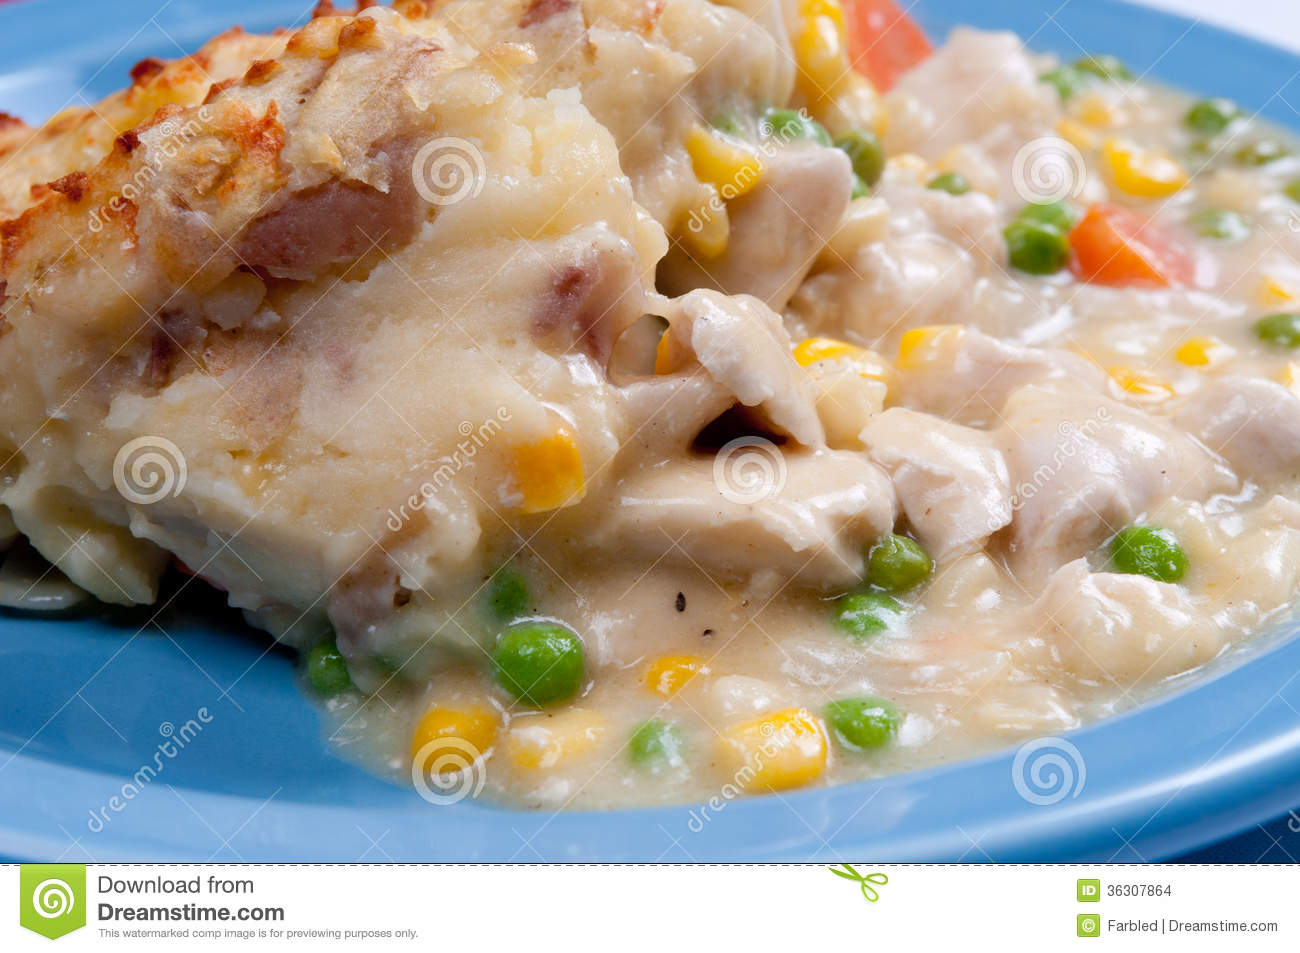 Chicken Pot Pie With Mashed Potatoes And A Crispy Topping